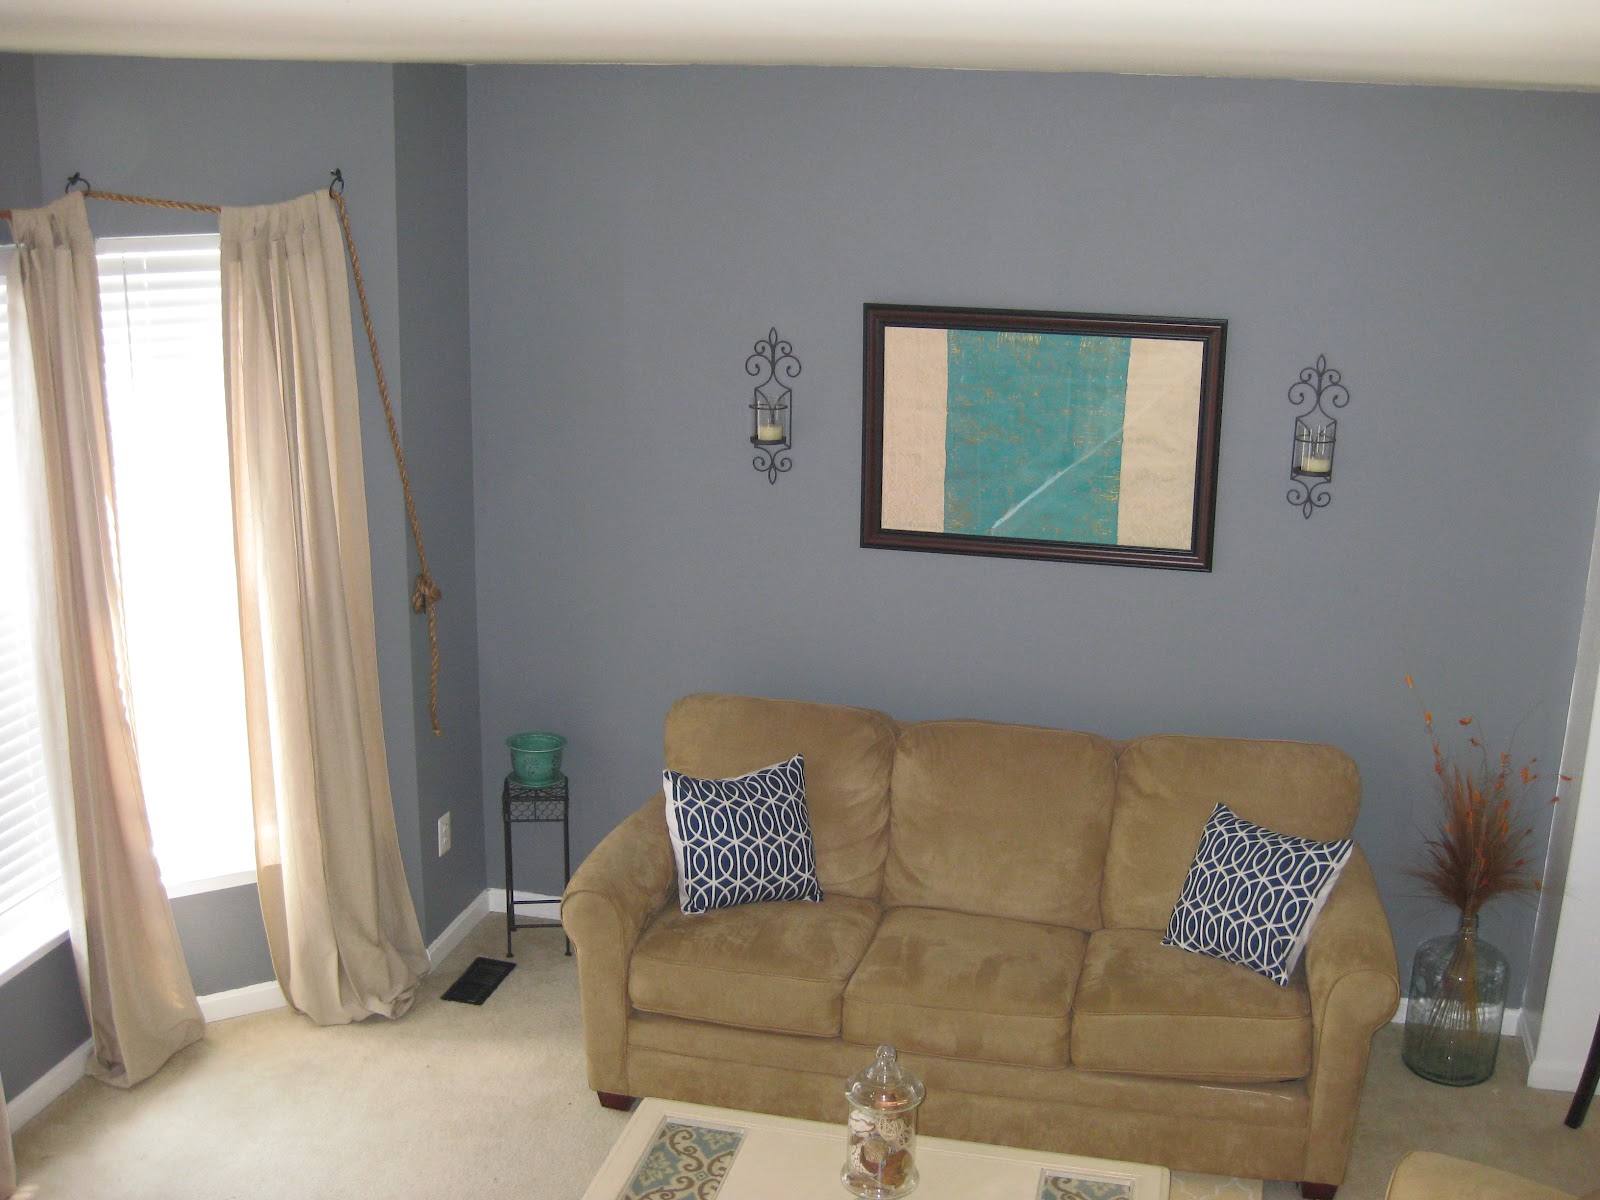  blogspotcom201204framed out living room wall by amyhtml